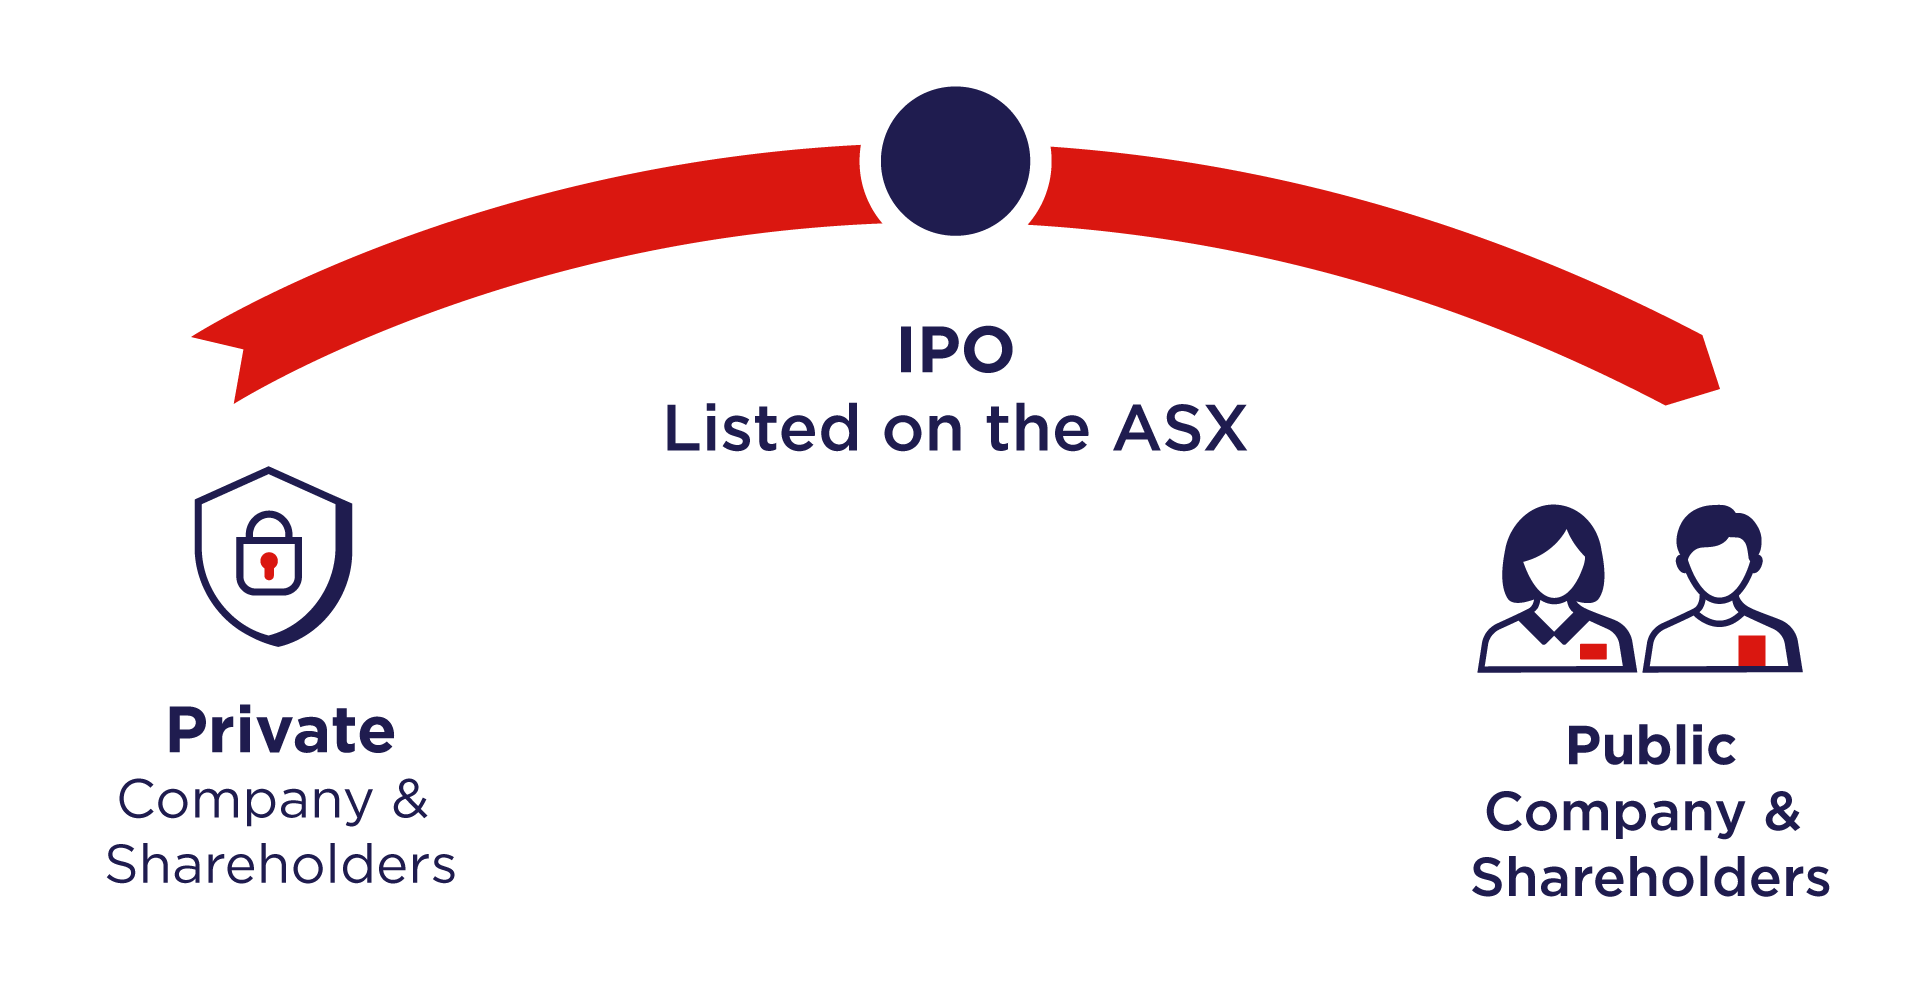 A private company with private shareholders lists on the ASX as an IPO and becomes a public company with public shareholders.